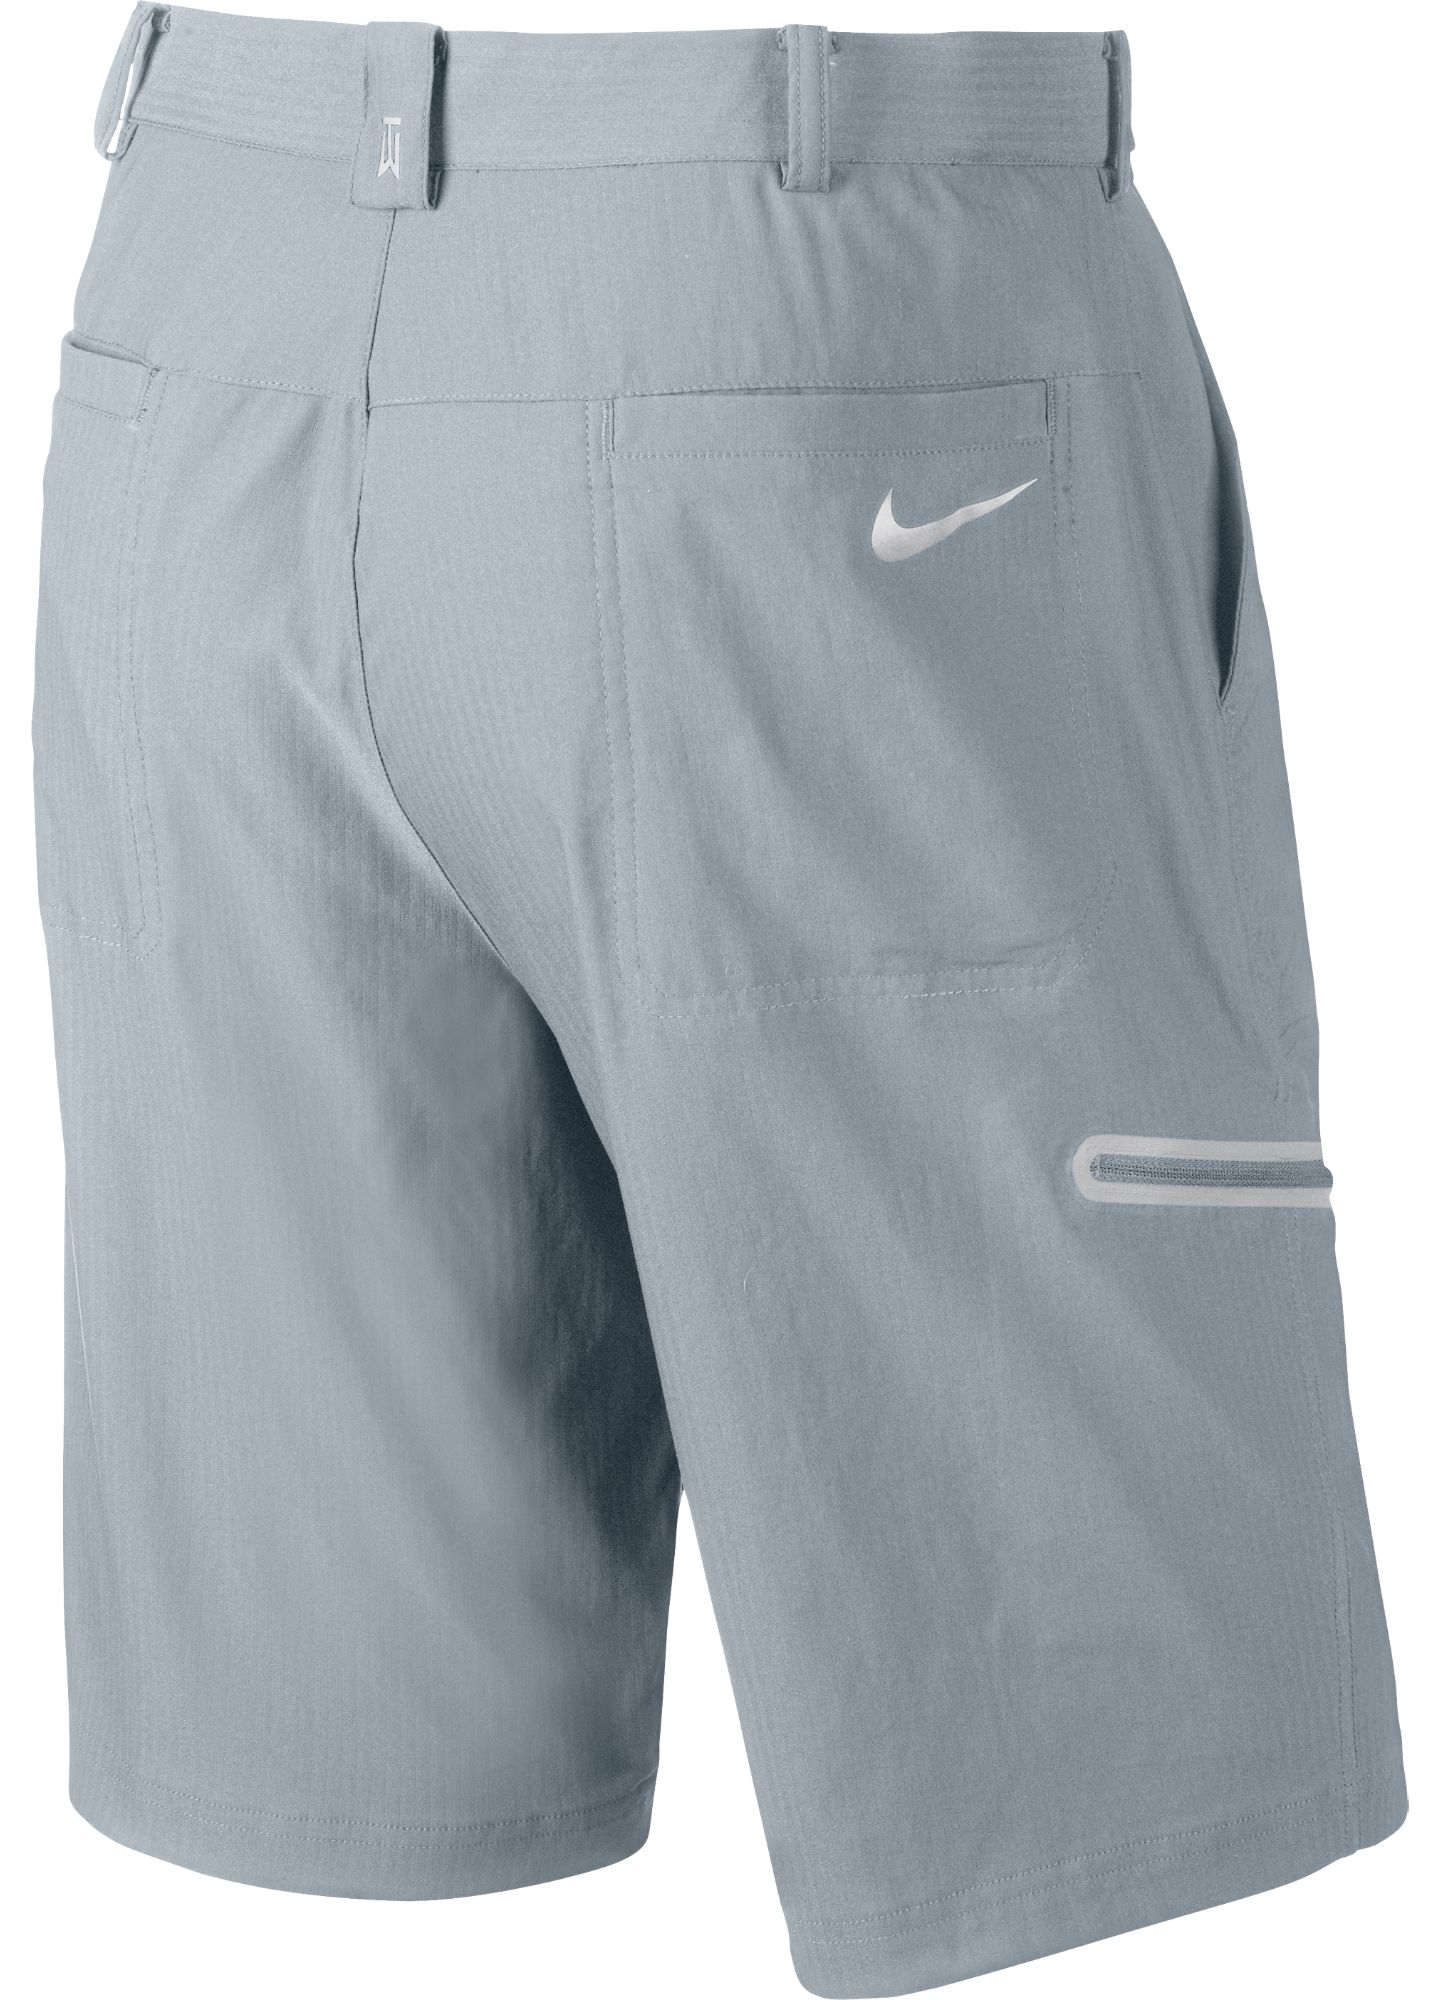 tiger woods practice shorts